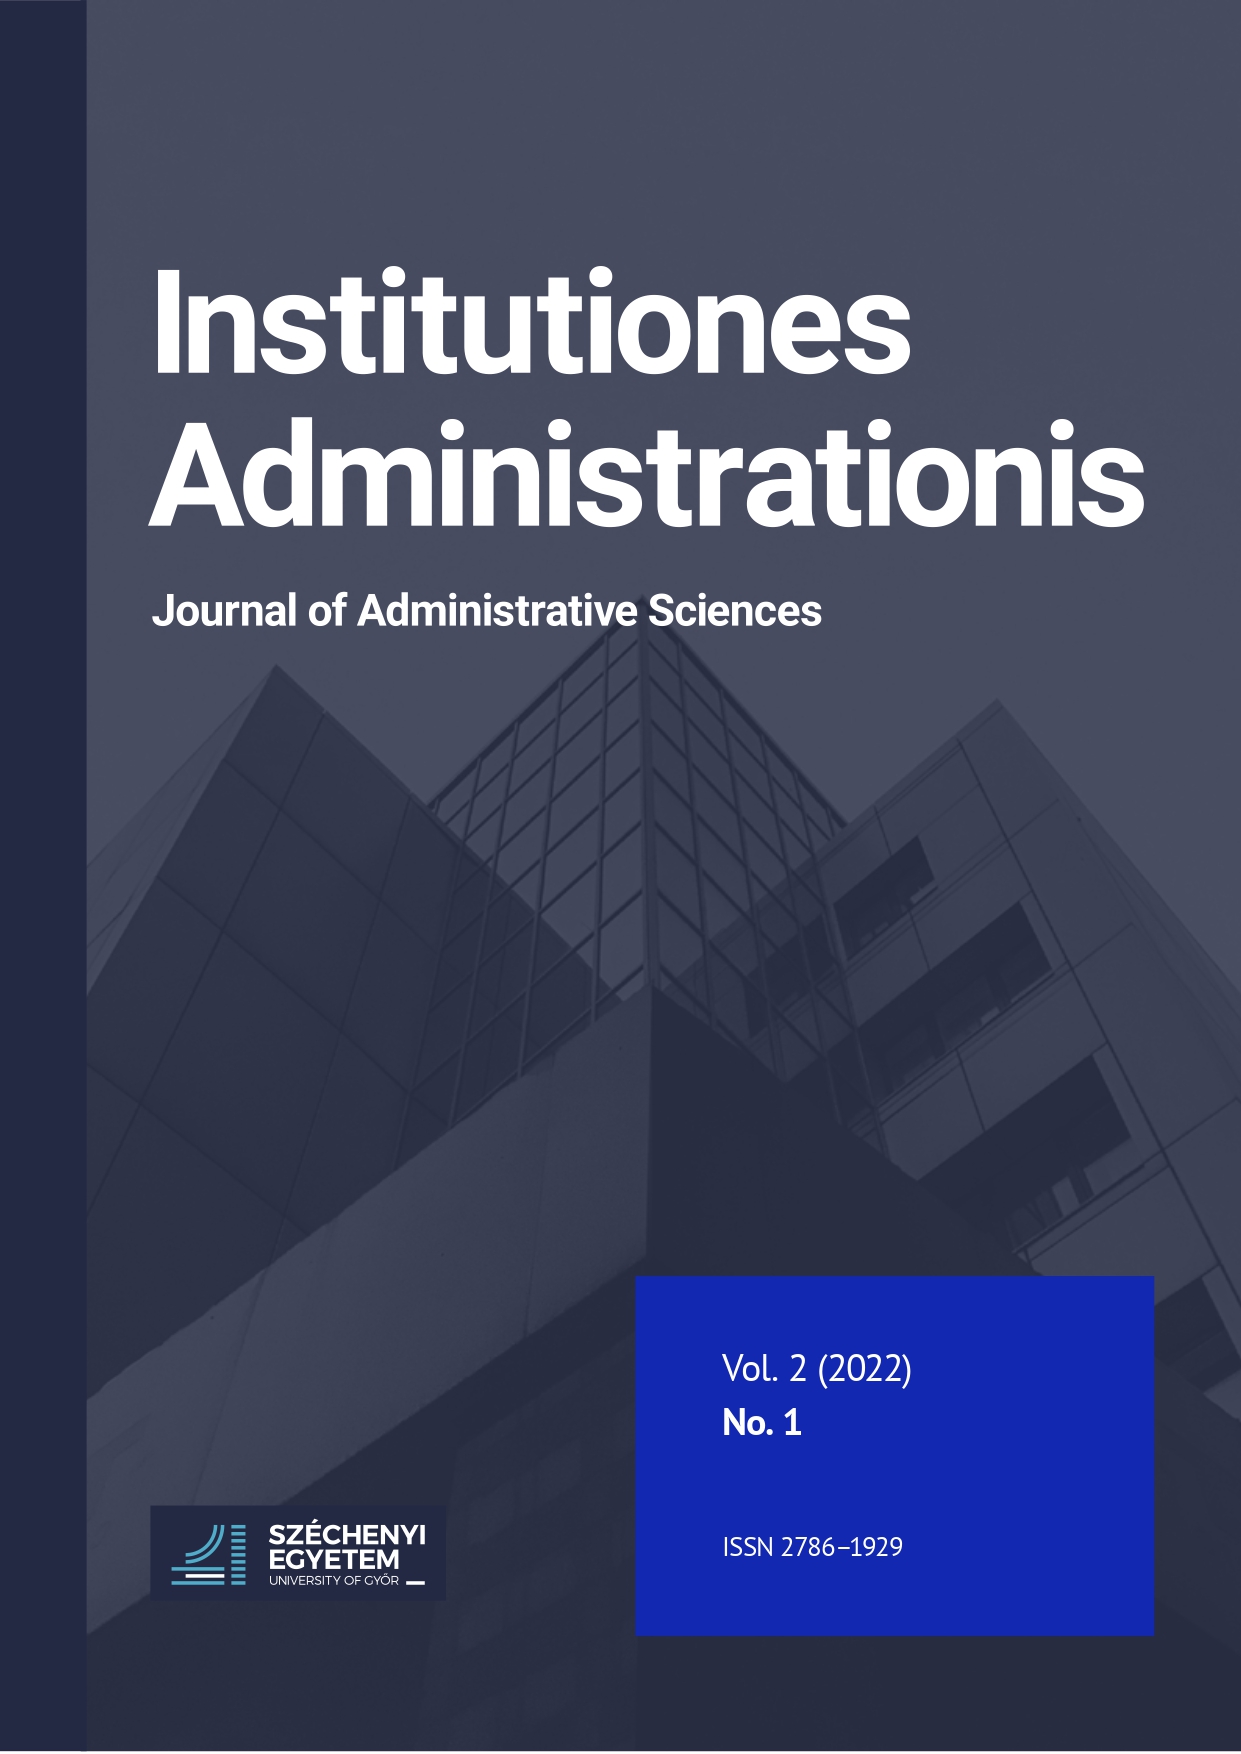 Academic associations in the field of administrative sciences in Central and Eastern Europe, or what could be the medium-term objectives of the newly established Central and Eastern European Society for Administrative Sciences? Cover Image